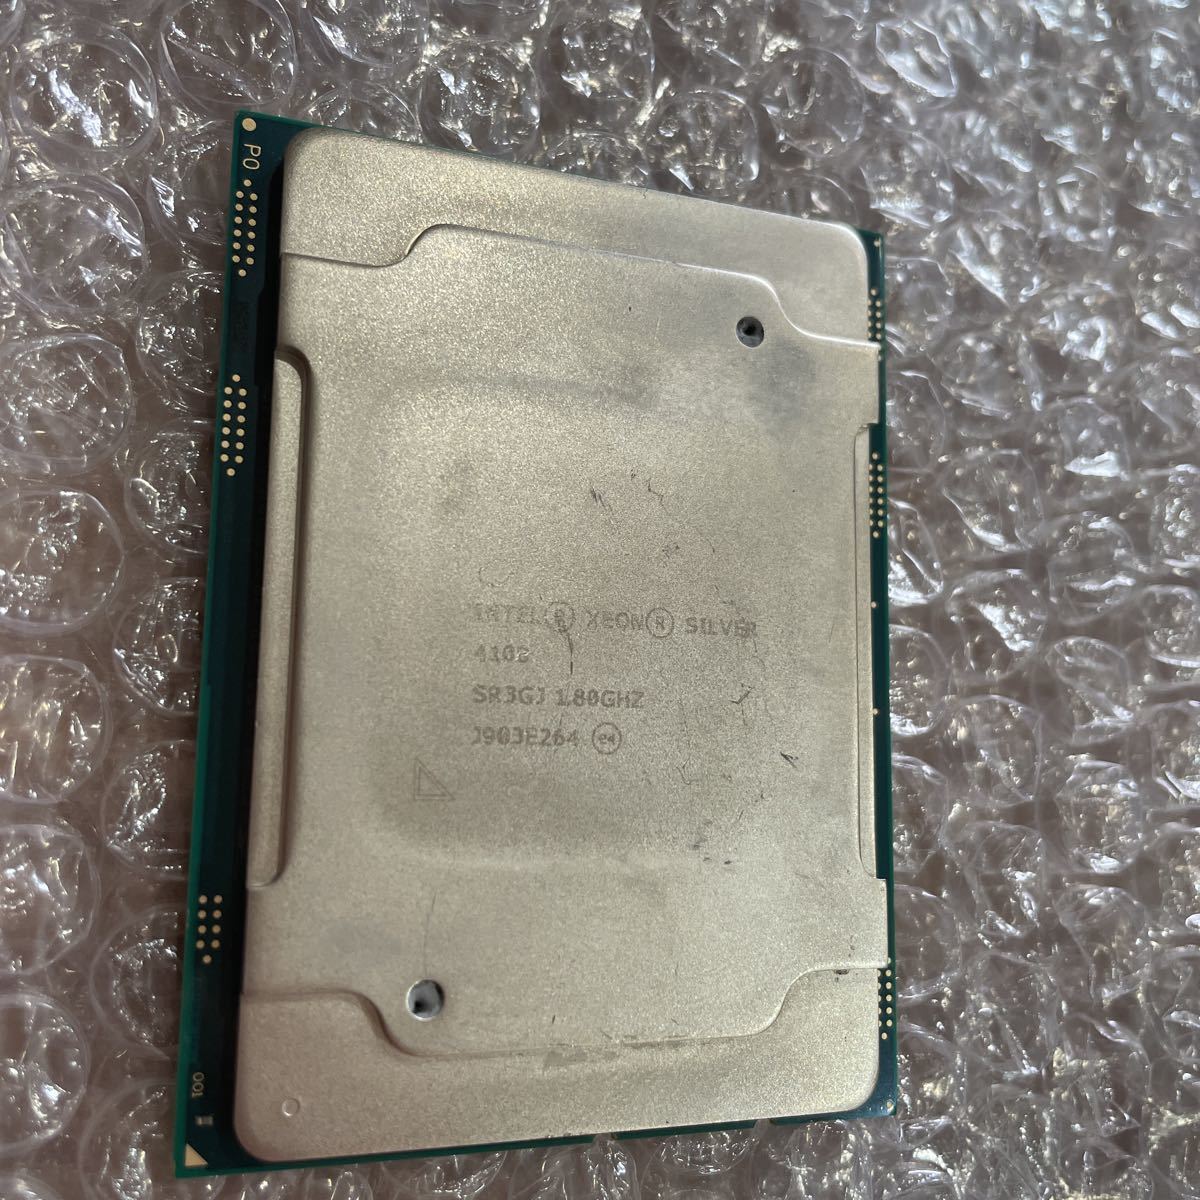  used Intel xeon Gold 6132 SR333 Silver 4108 1.80GHz SR3GJ 2 pieces set present condition goods operation not yet verification 